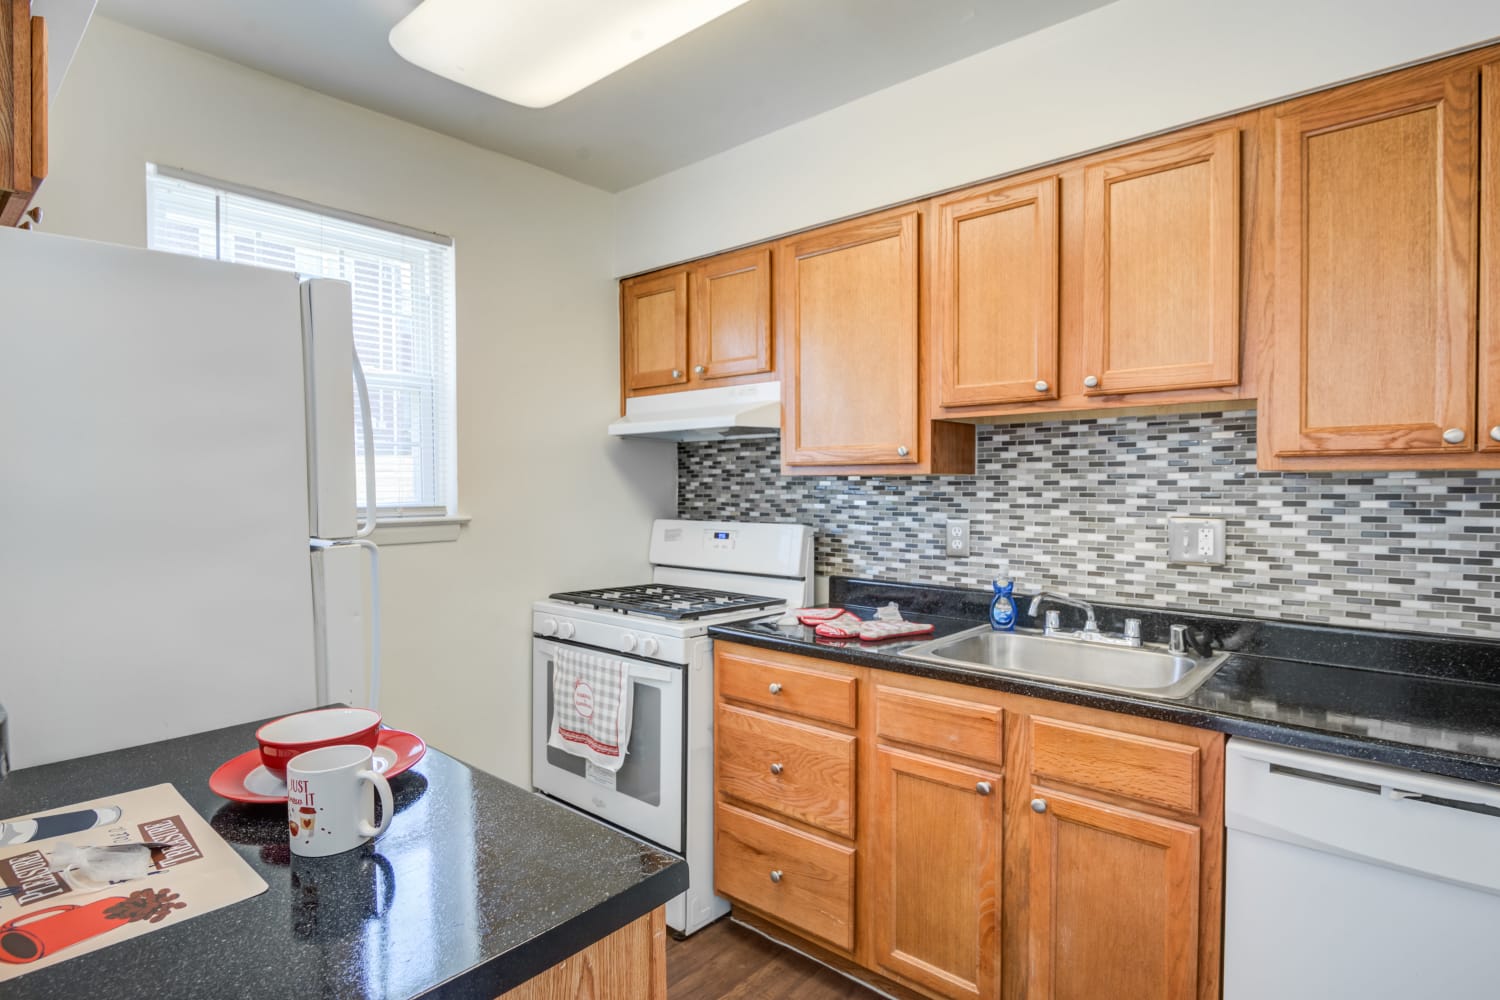 Kitchen featuring white appliances at Arbors at Edenbridge Apartments & Townhomes in Parkville, MD